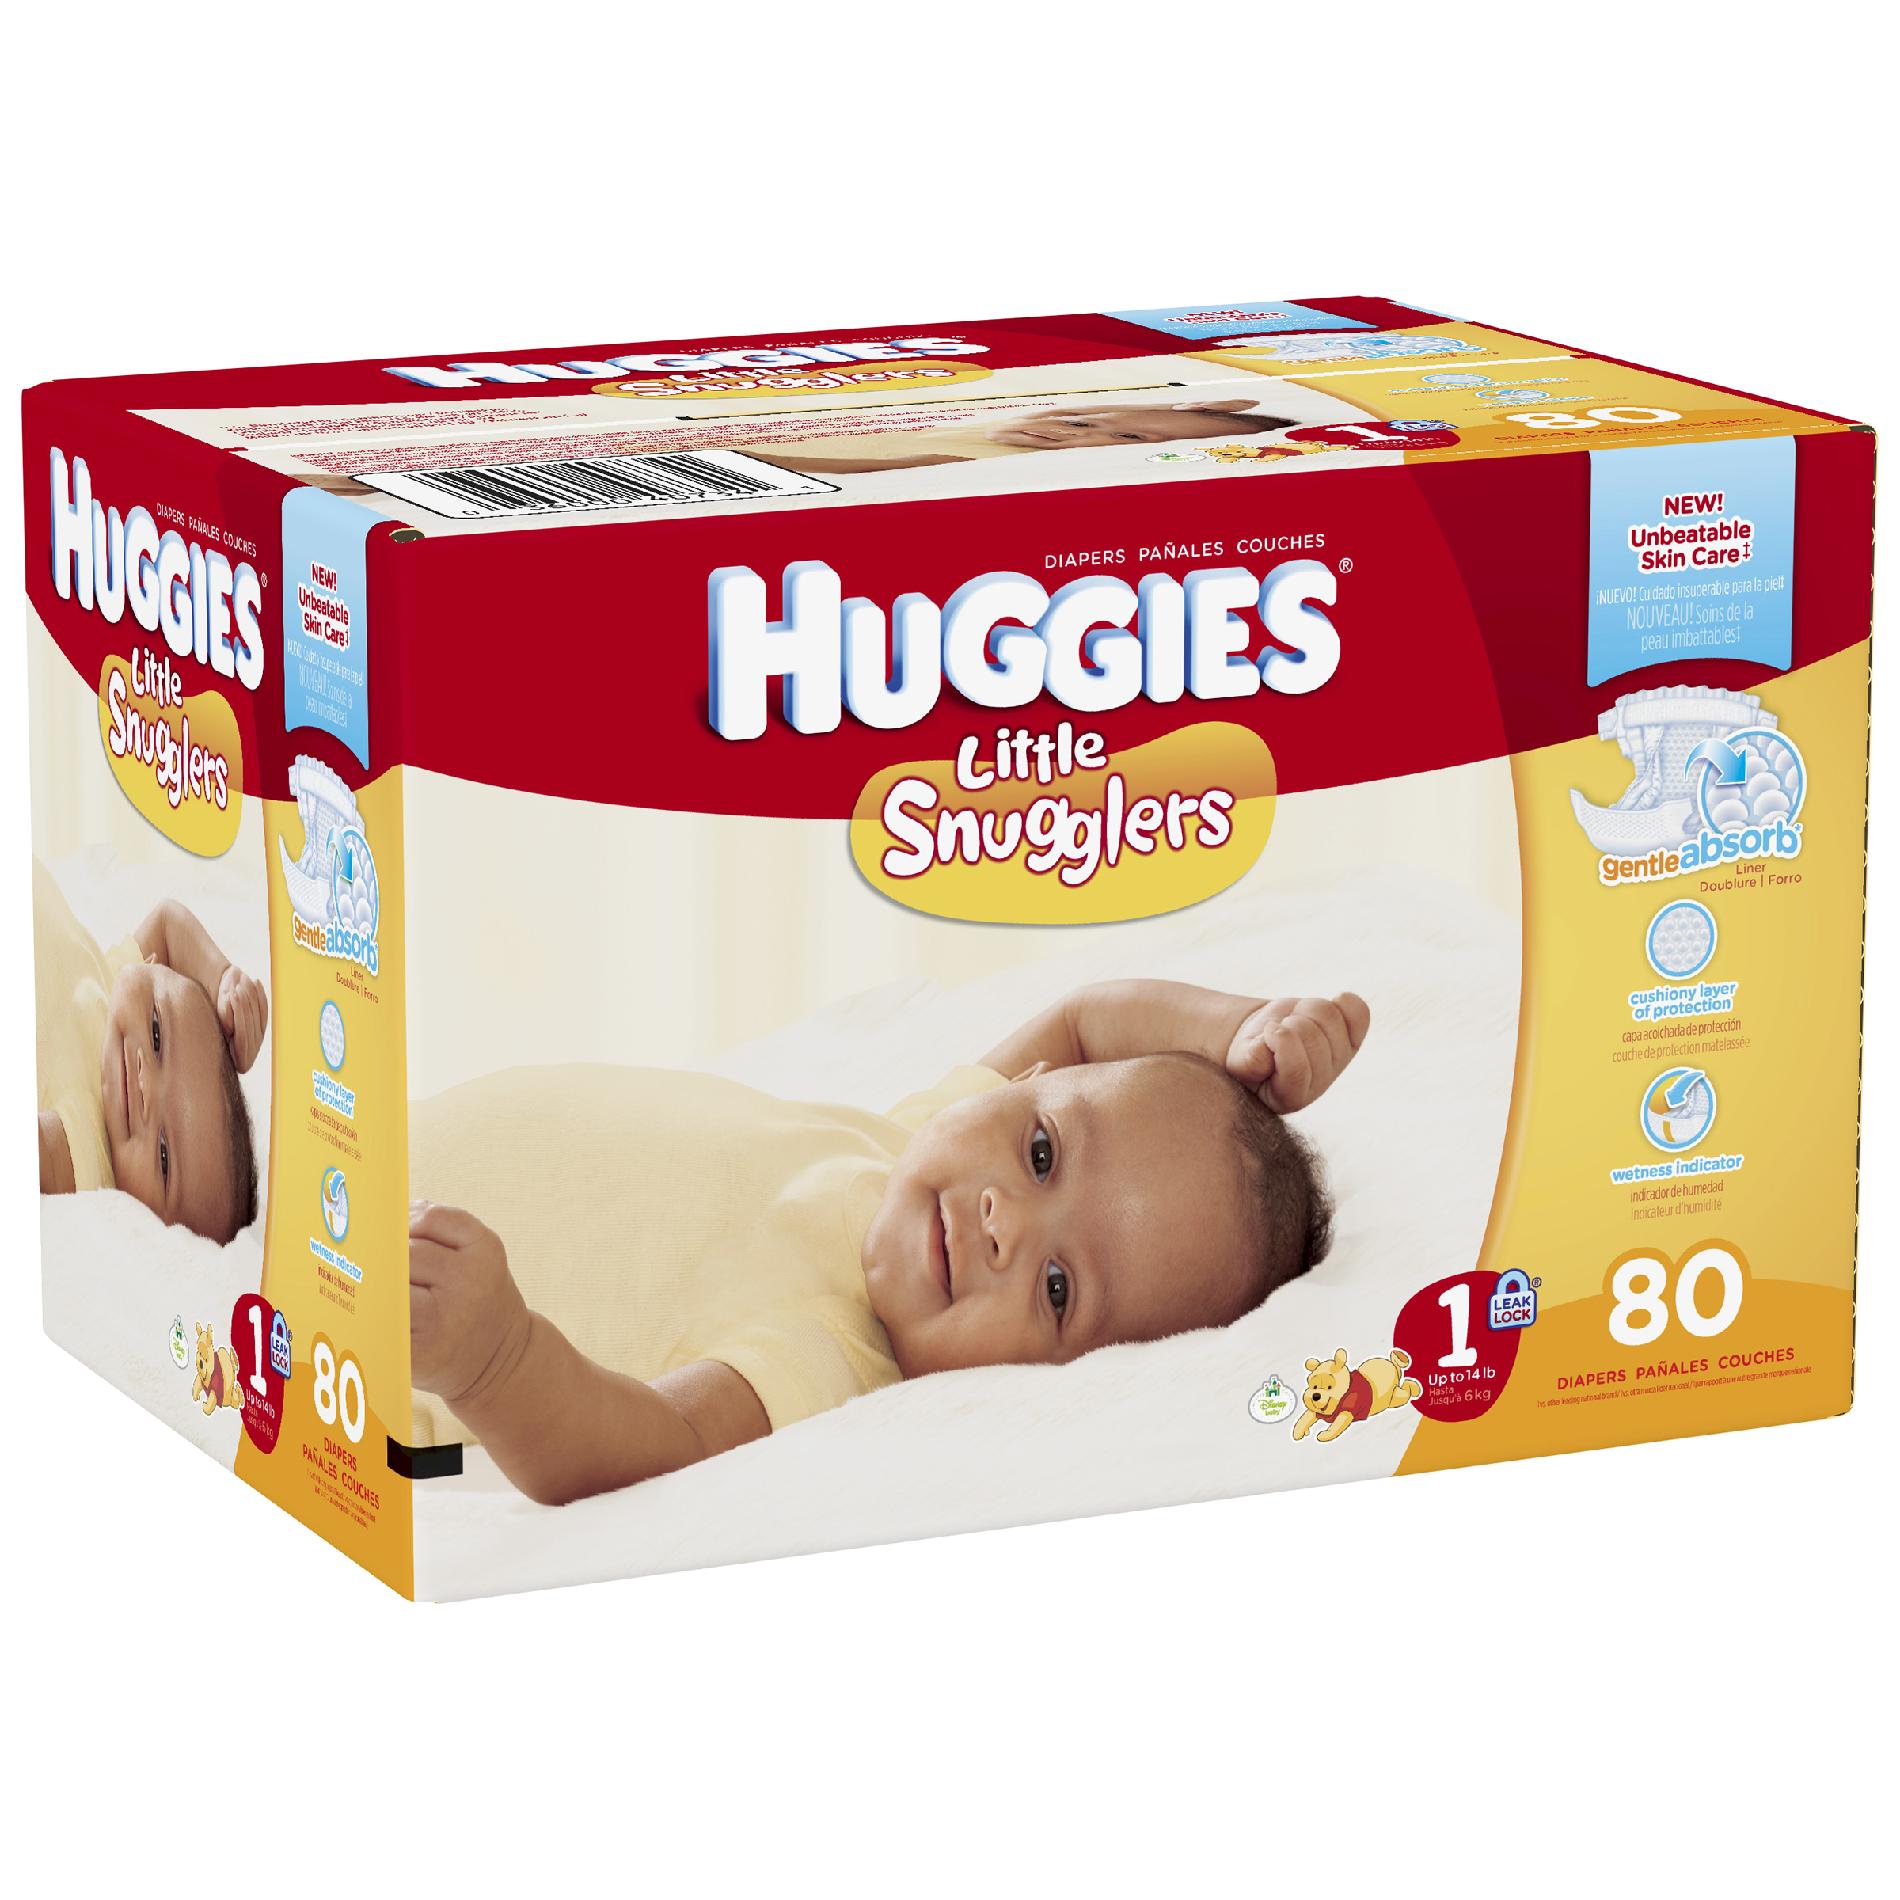 Huggies Size 1 Diapers 80 CT BOX - Baby - Baby Diapering ...